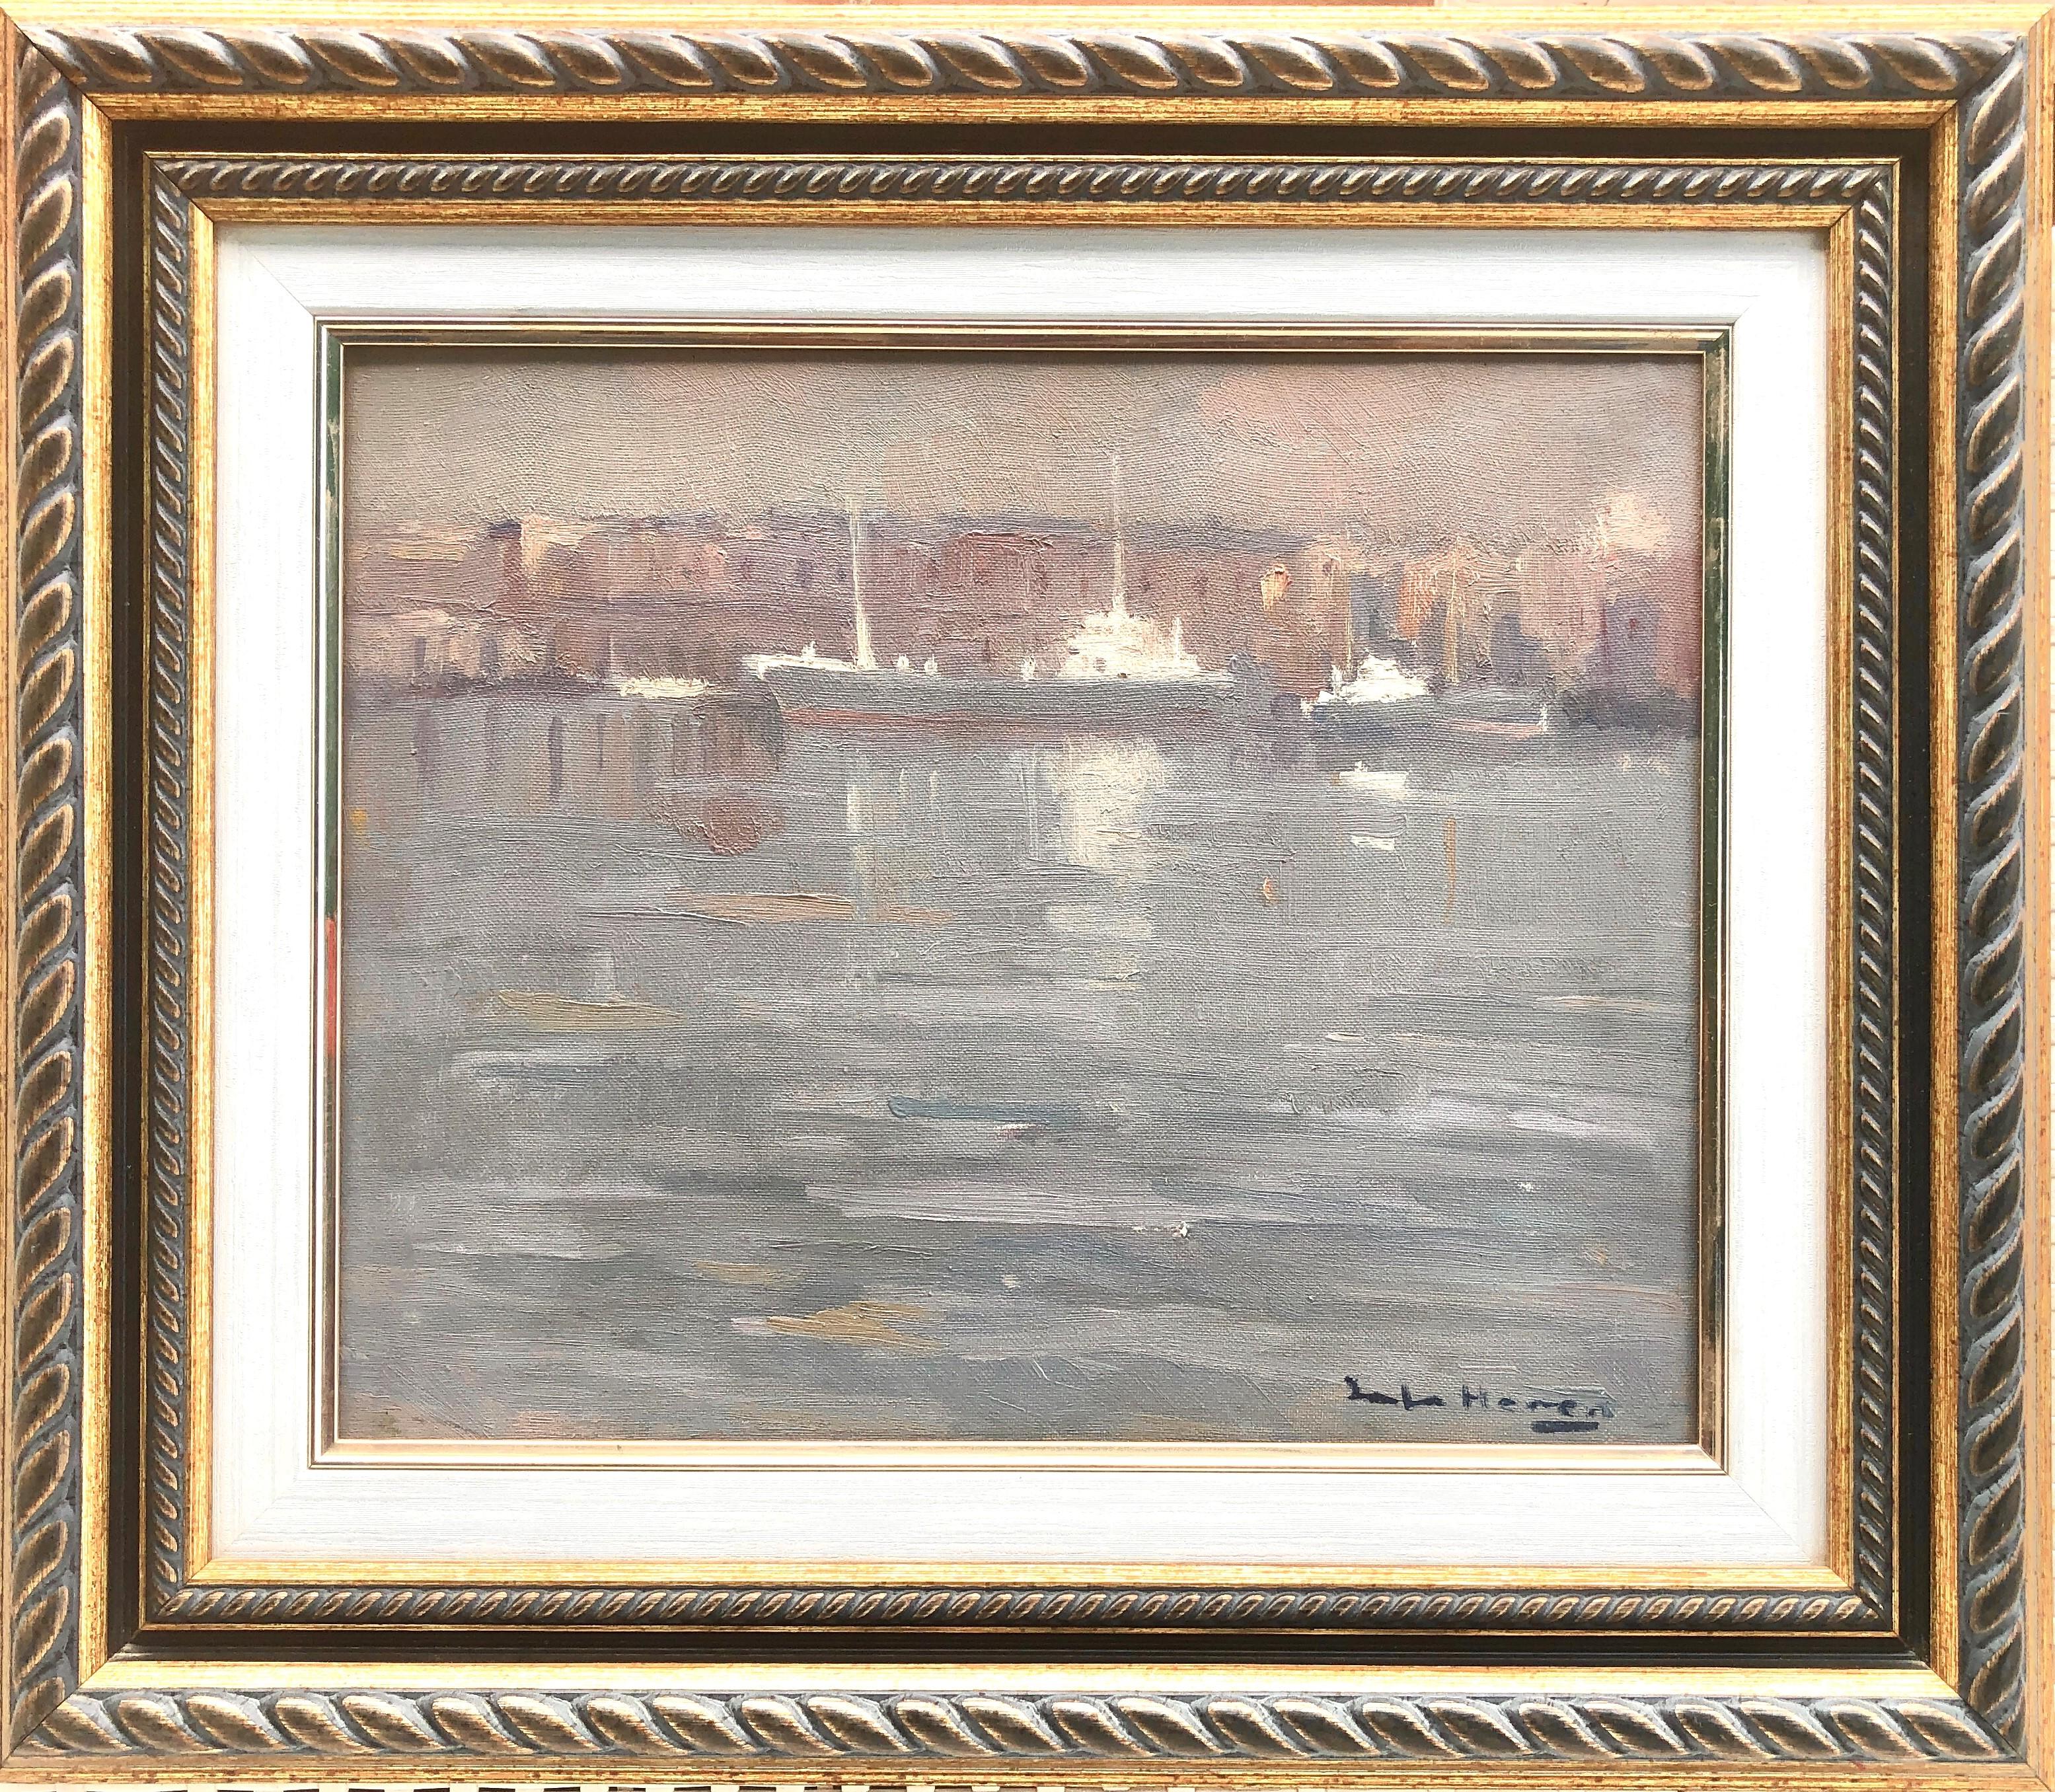 Gray day seaport of Barcelona Spain oil on canvas painting seascape - Painting by Antonio Sala Herrero